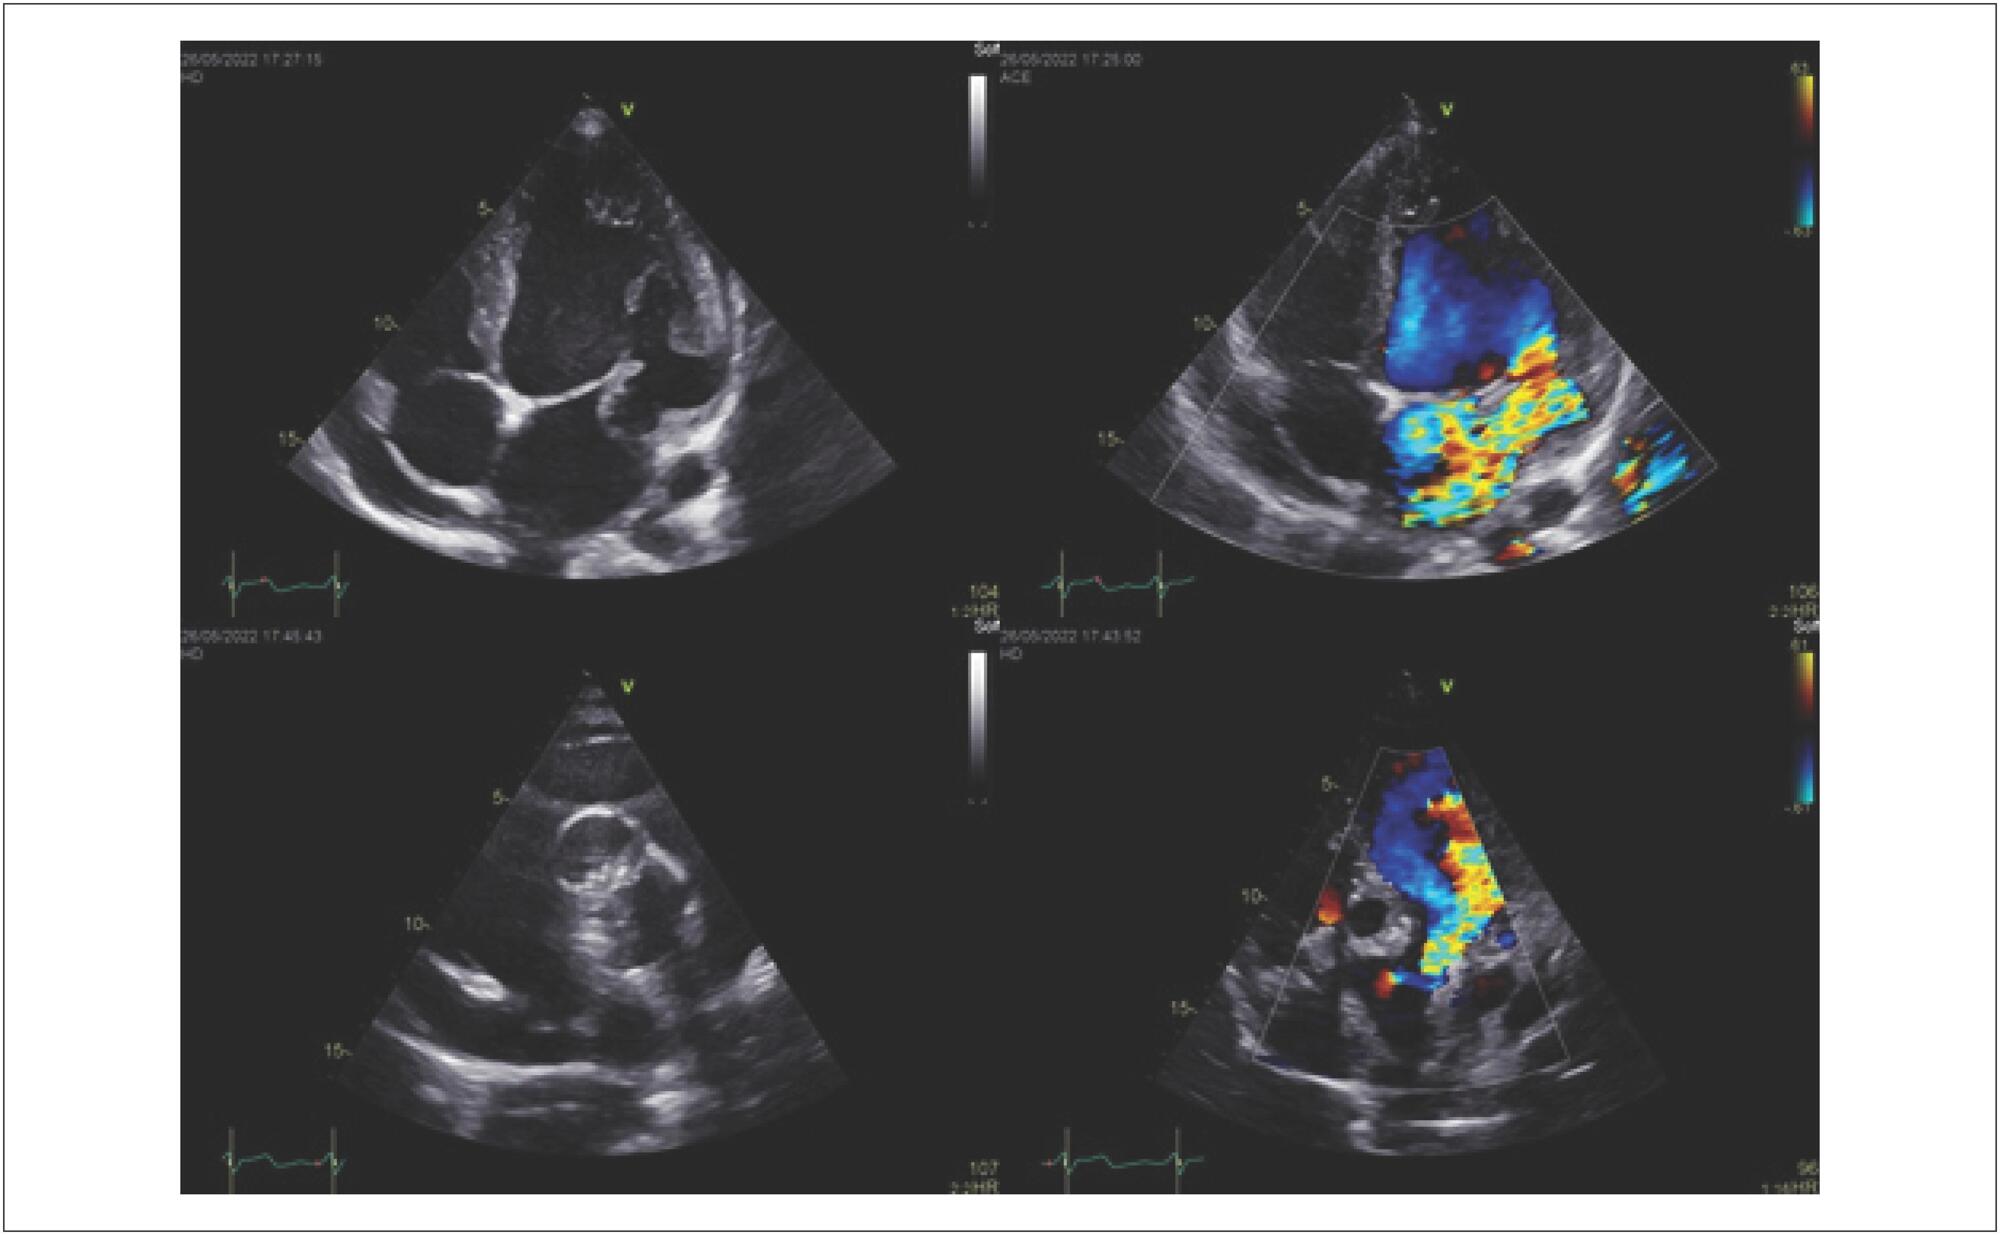 Idiopathic Mitral and Aortic Subvalvular Aneurysm in a Young Patient